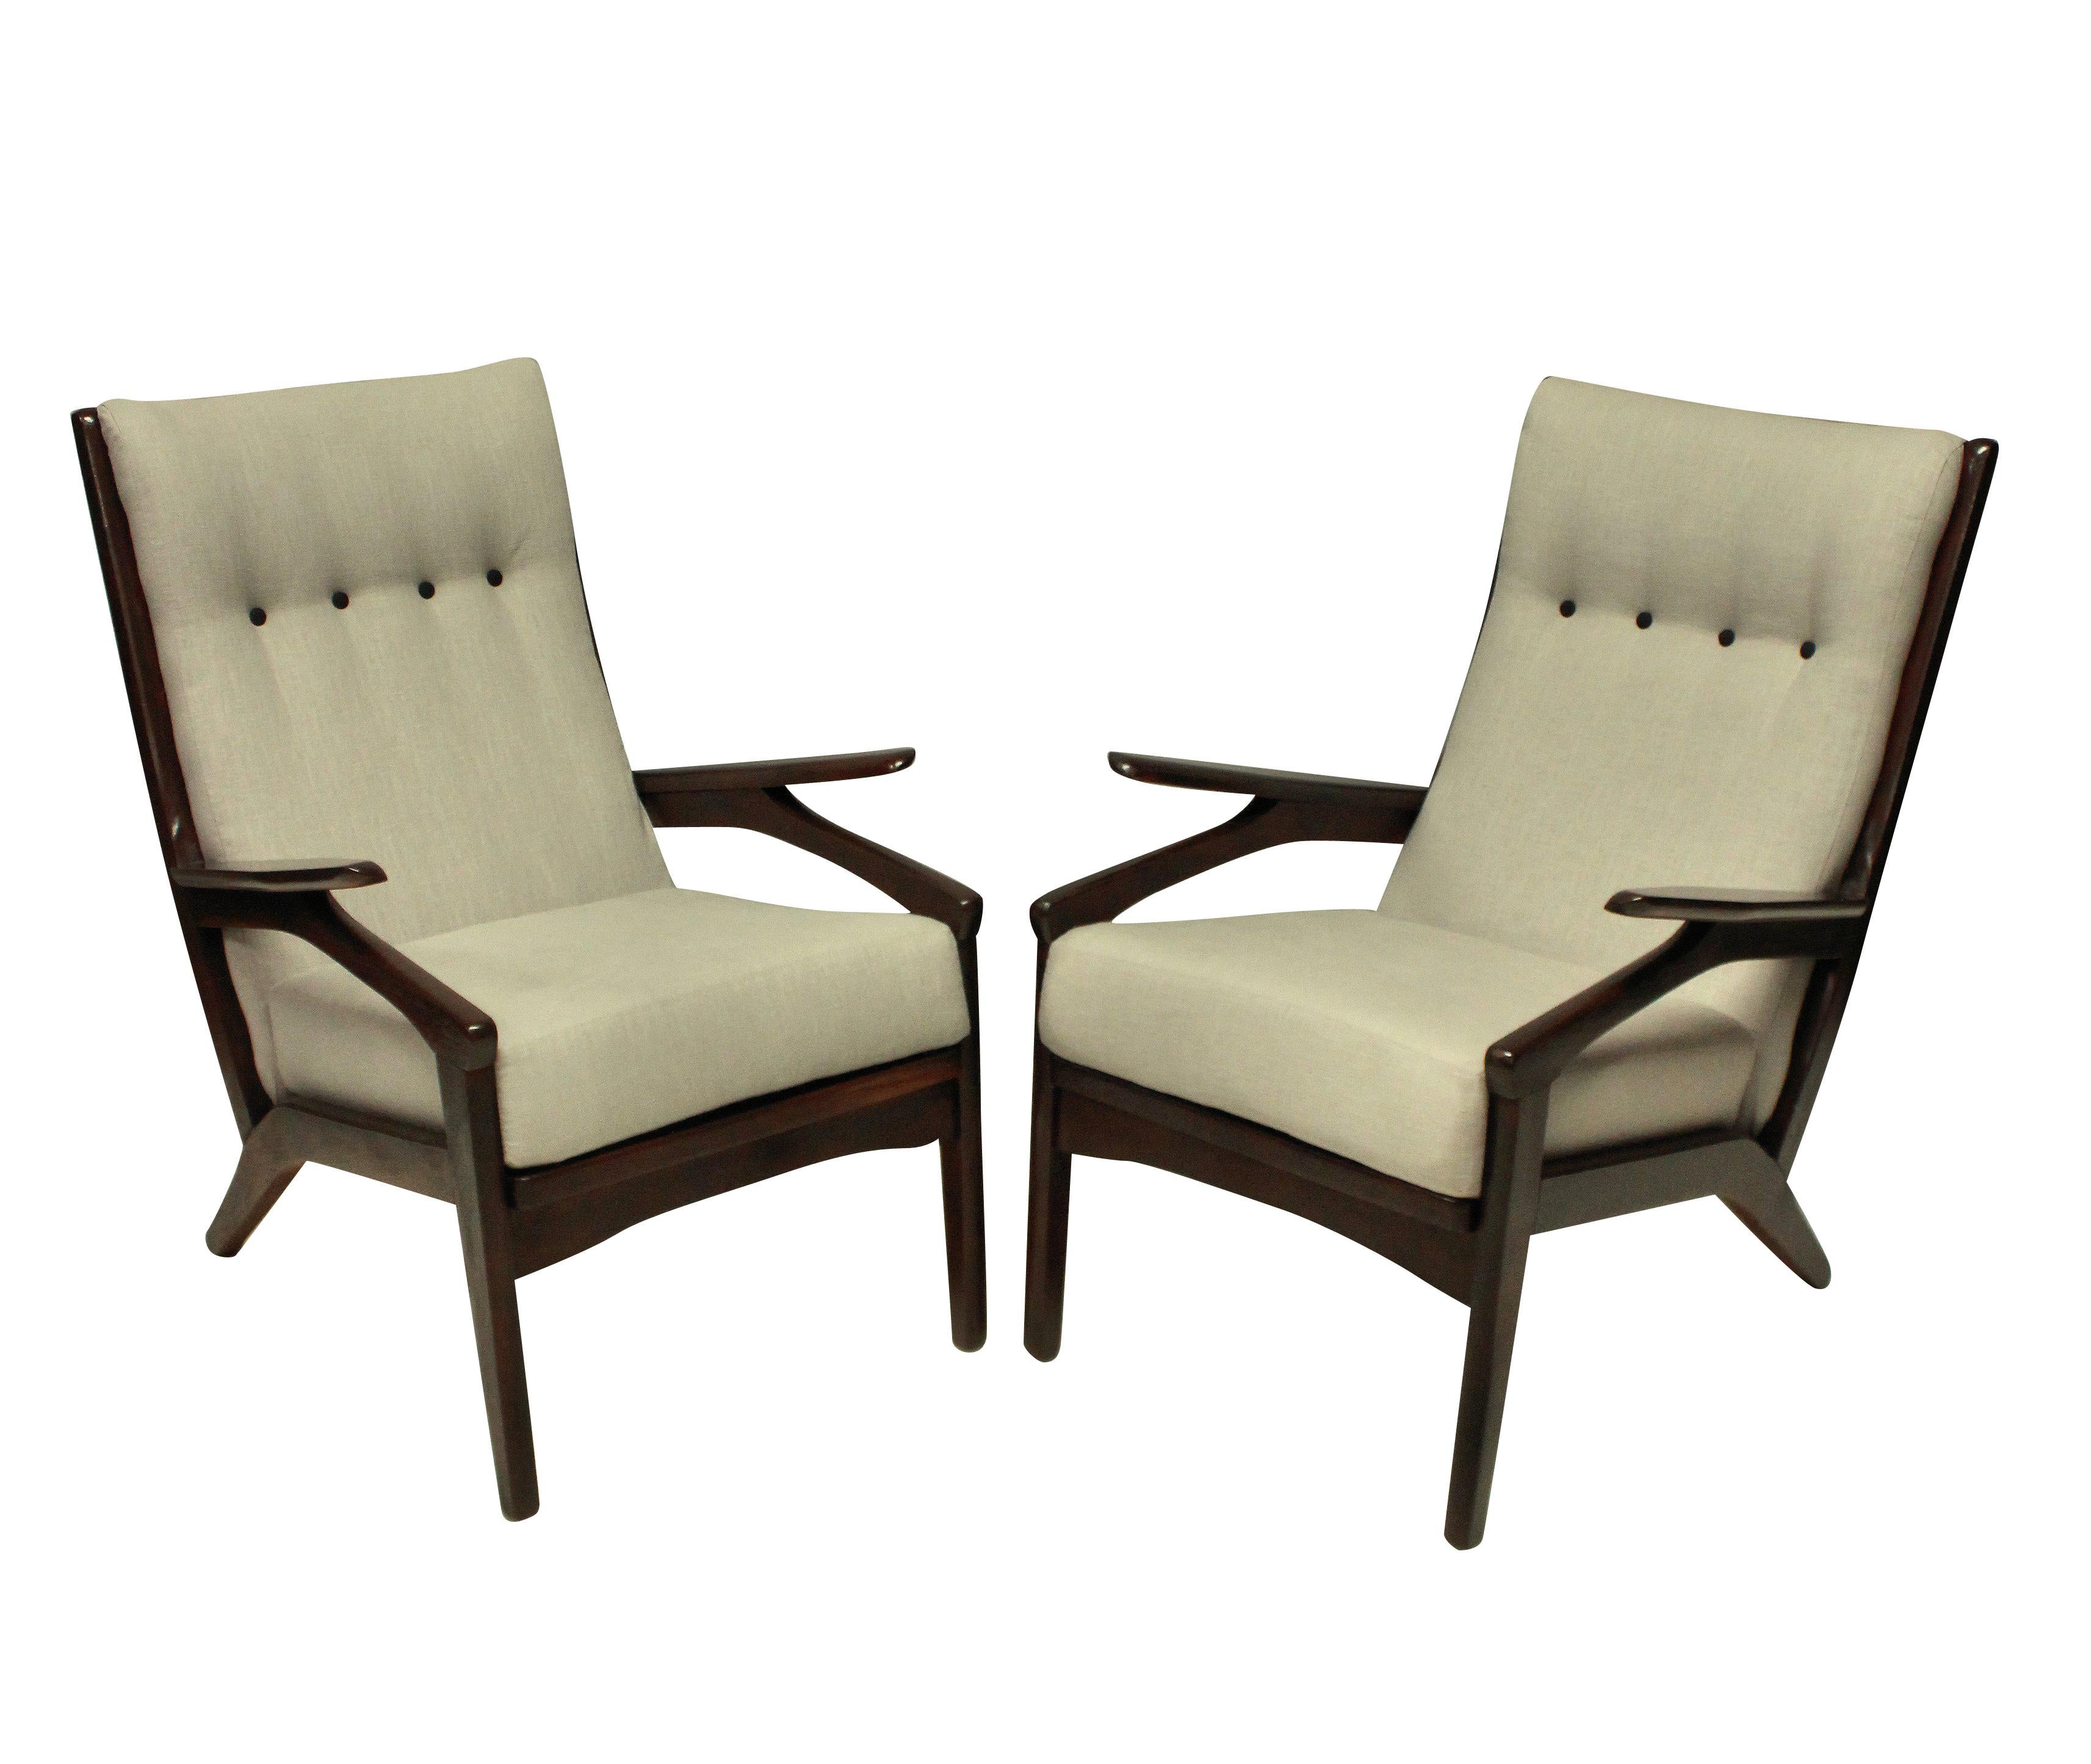 A pair of midcentury Danish armchairs in stained teak, which is a dark walnut in color. Newly upholstered in plain linen.